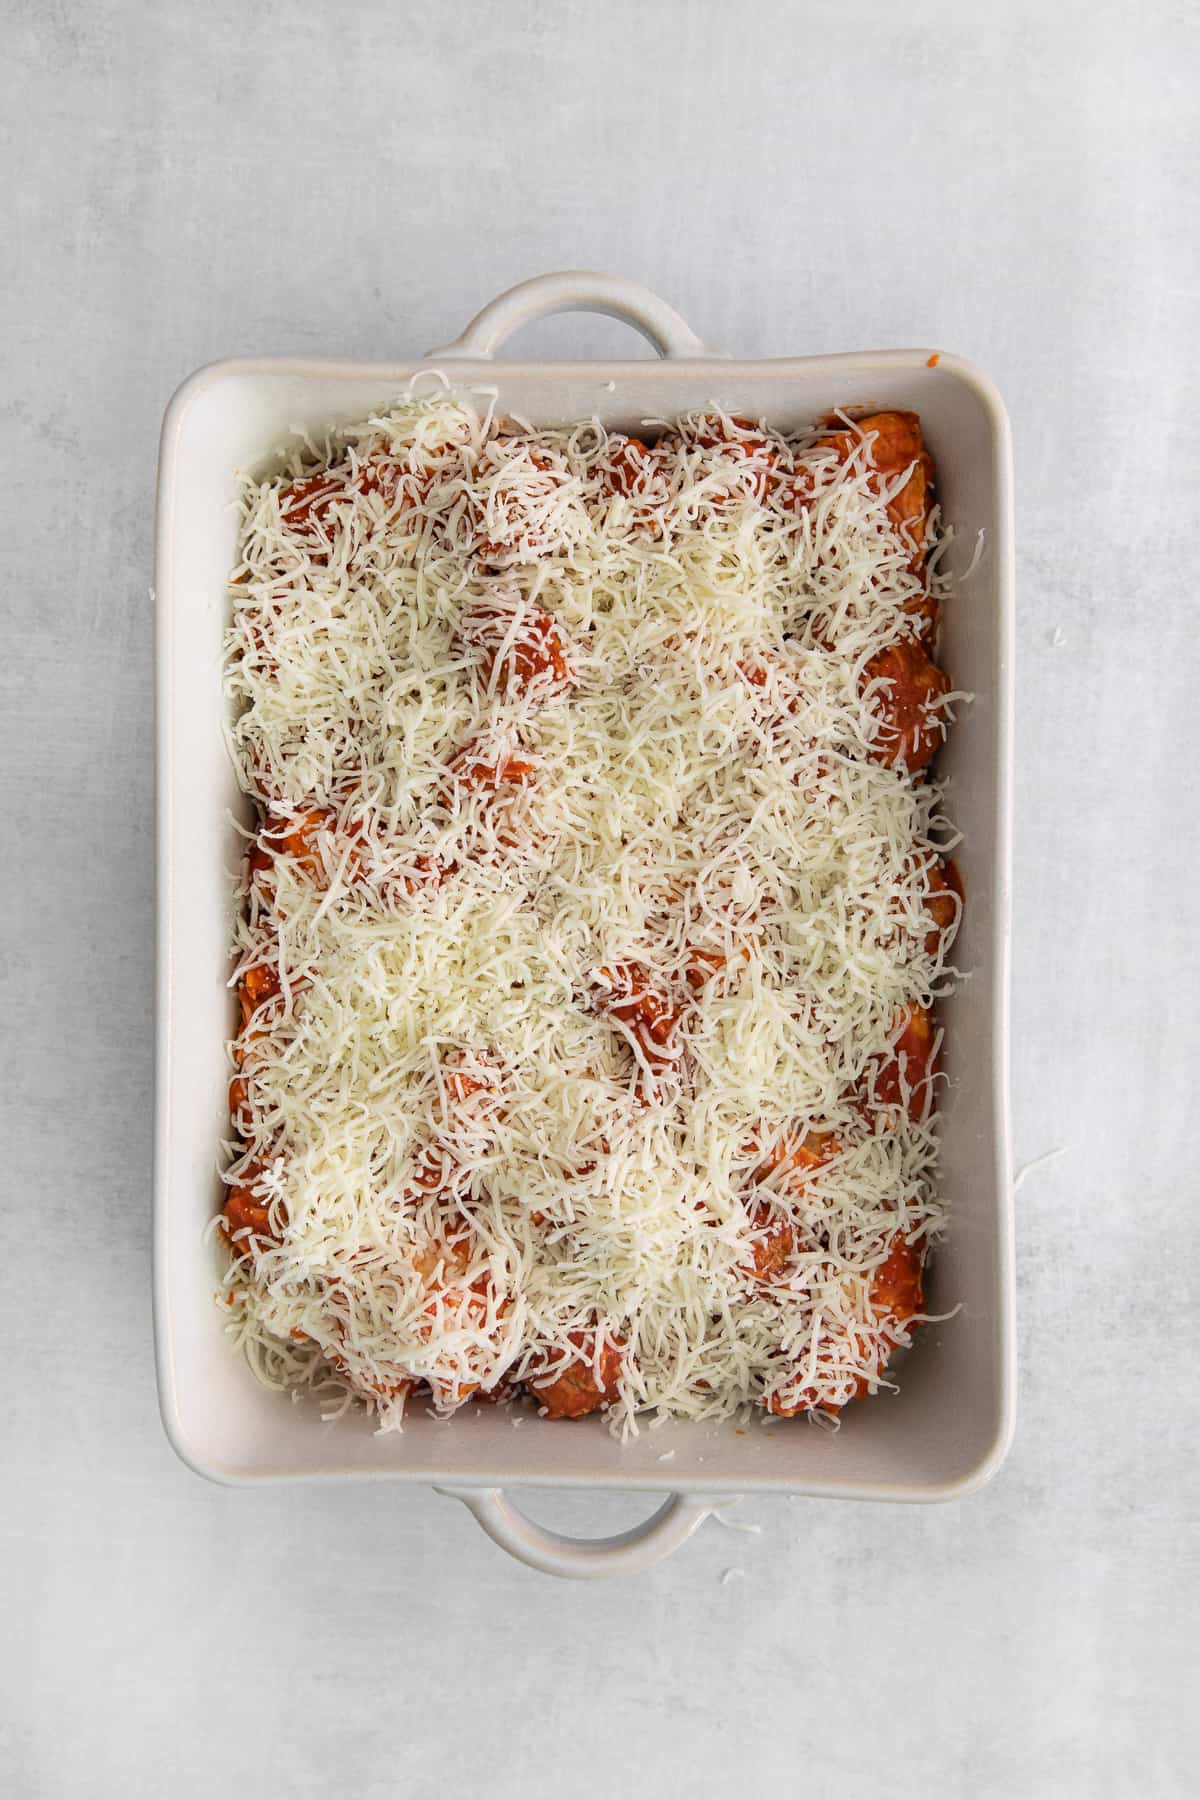 Bubble bake covered in shredded cheese in a casserole dish.